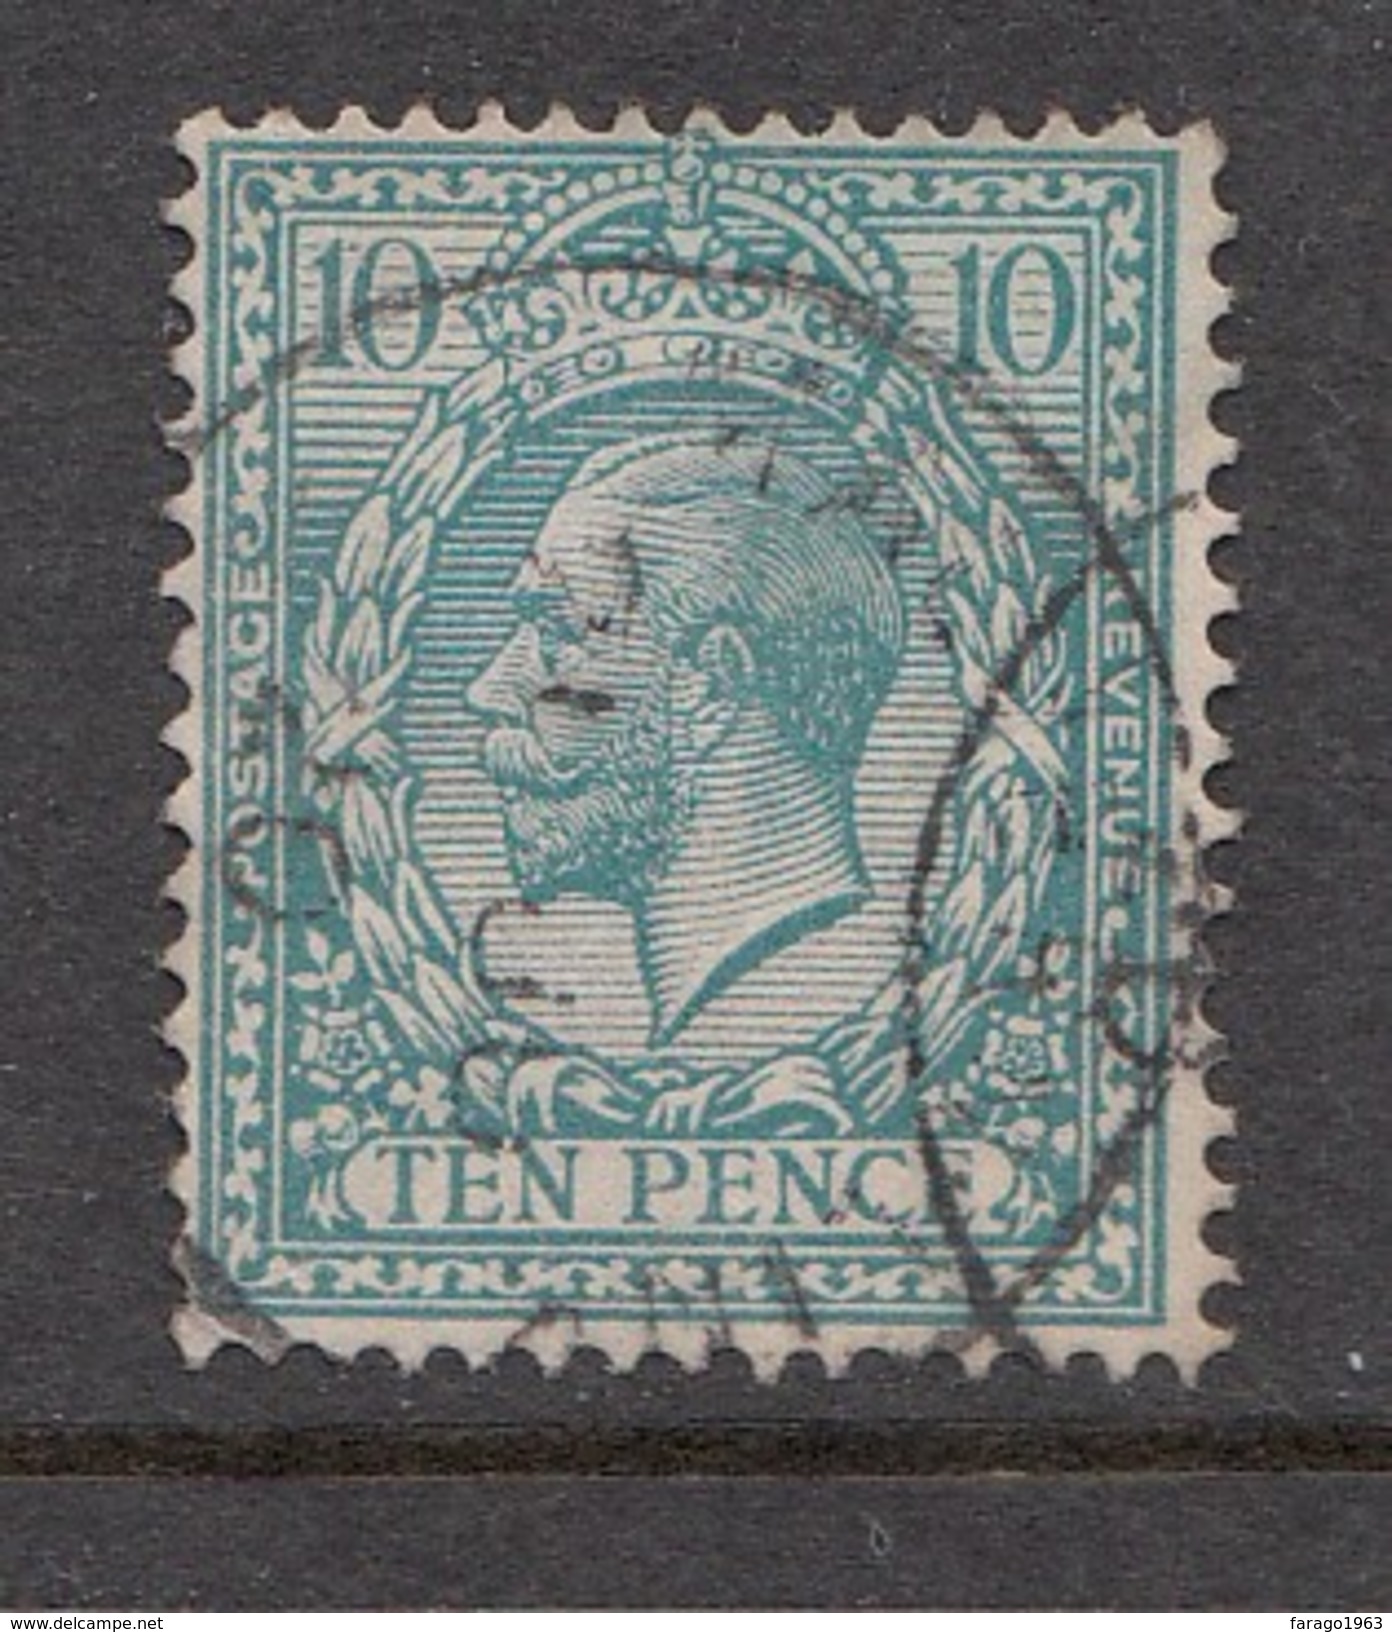 1920 Great Britain KGV 10d Turquoise Blue Clean Stamp With Light  Circle Date Cancellation  21 JU 20 Used SG394 - Gebraucht